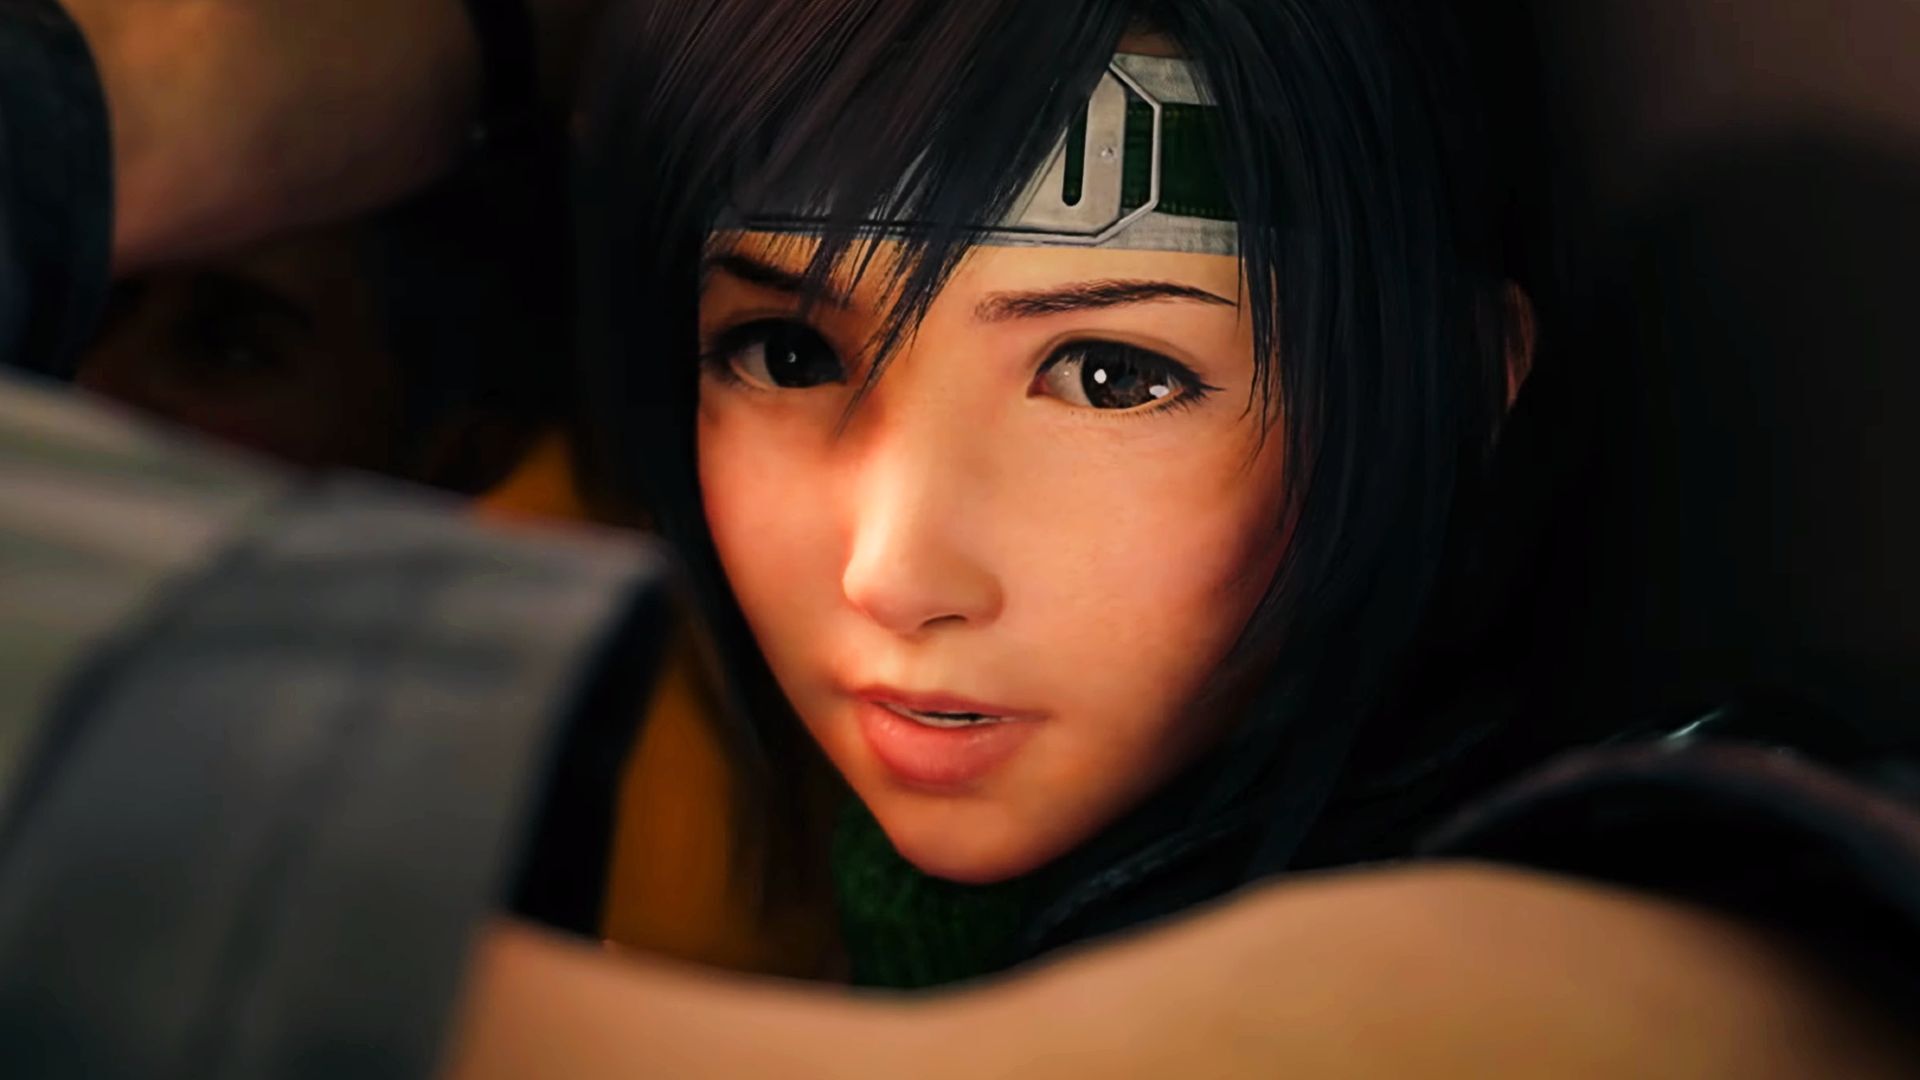 Final Fantasy VII Remake comes to PC via Epic in one week